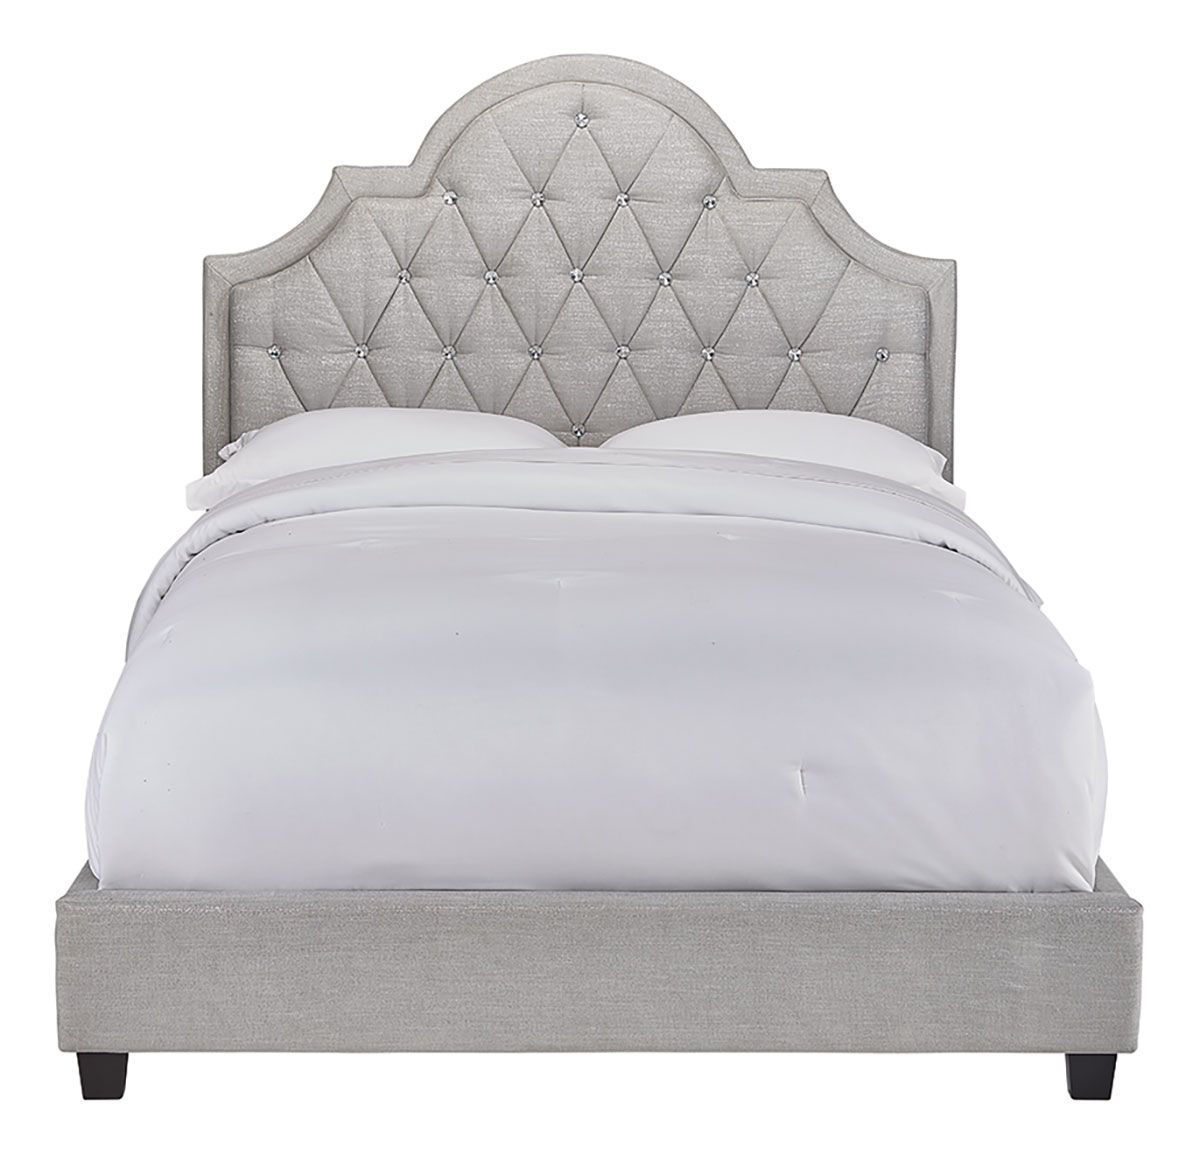 Belle Complete Queen Bed Badcock Home Furniture More,Picture Frame On Wall Free